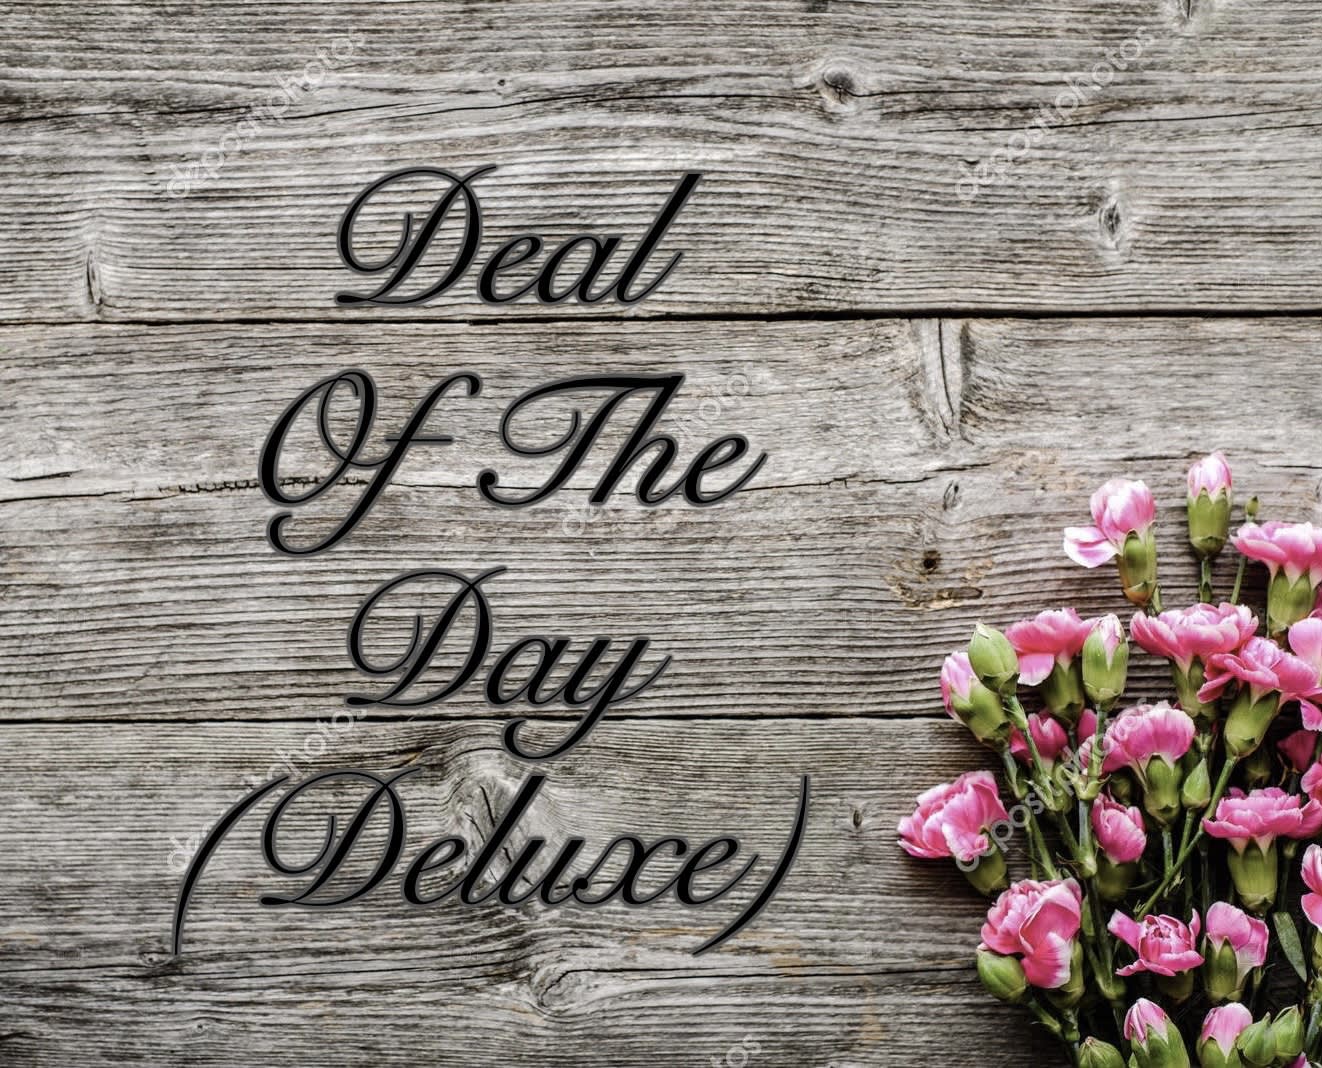 Deal of the Day (Deluxe) - Our deal of the day is a beautiful assortment of fresh, seasonal, flowers. The arrangement includes a mix of fresh flowers, a container and greenery to make it a delightful gift for someone special. 